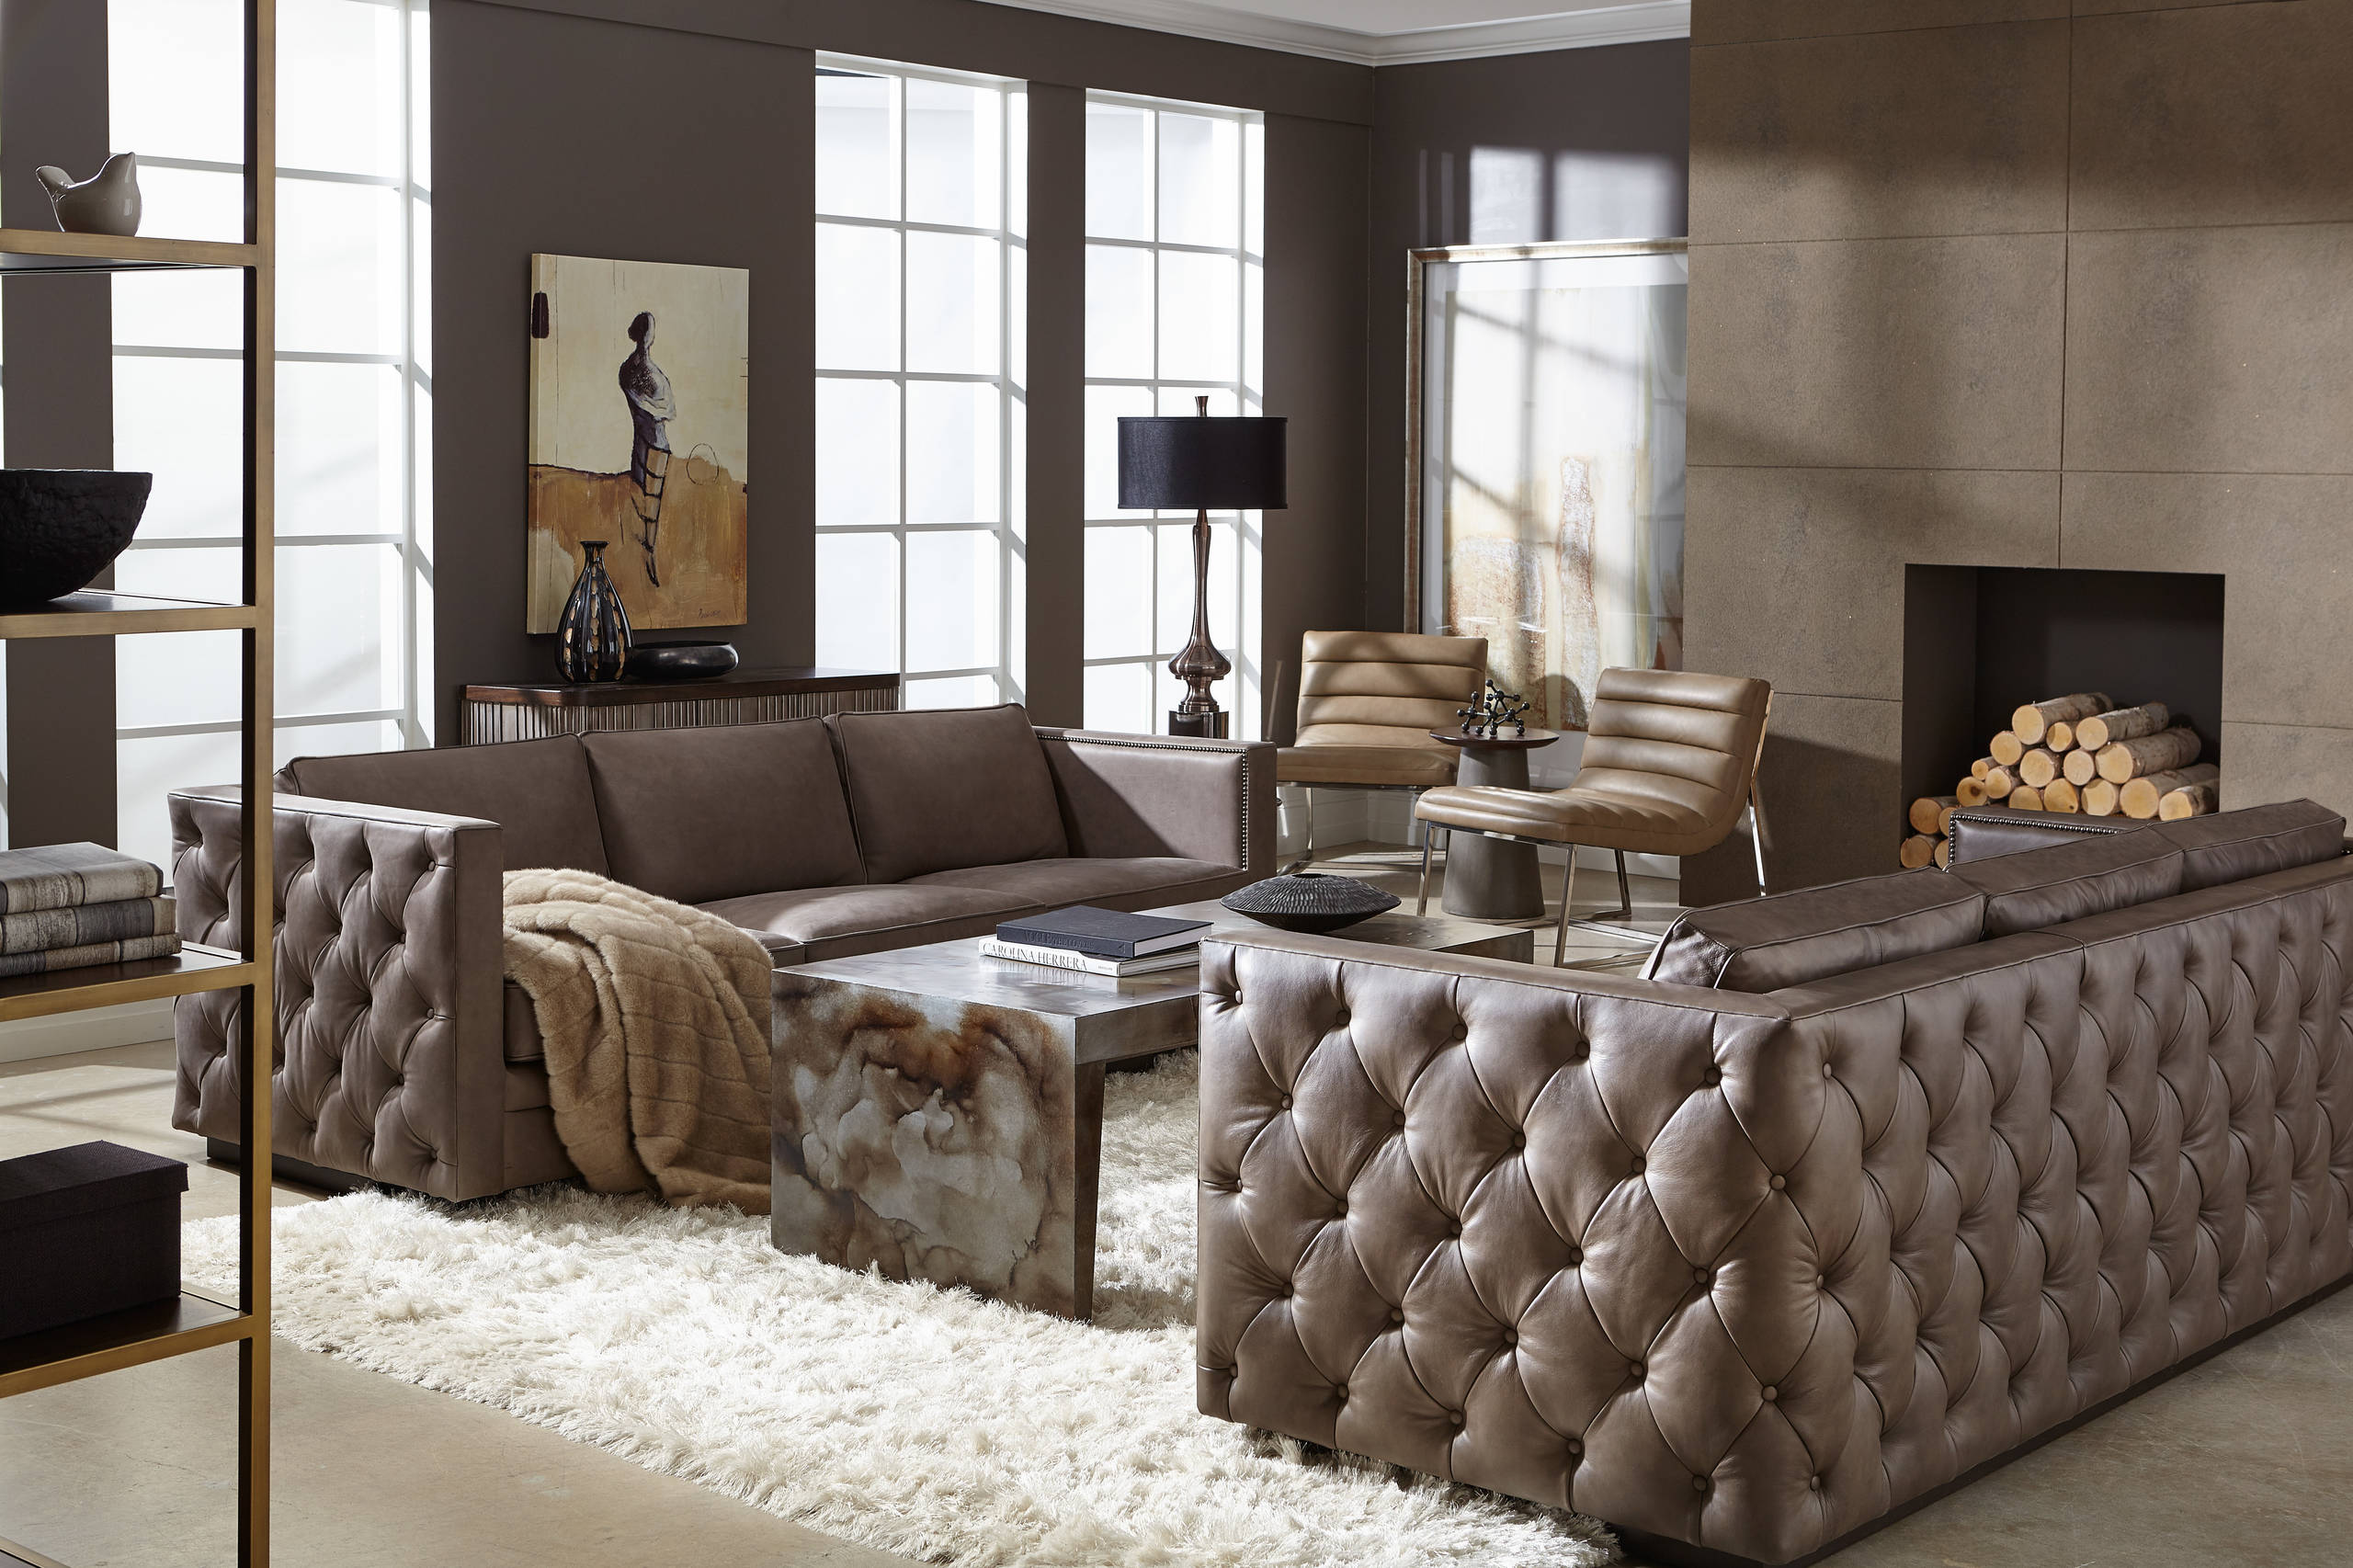 Hooker Furniture Lexie Sofa - Contemporary - Living Room - New York - by  Metro Designs LLC | Houzz